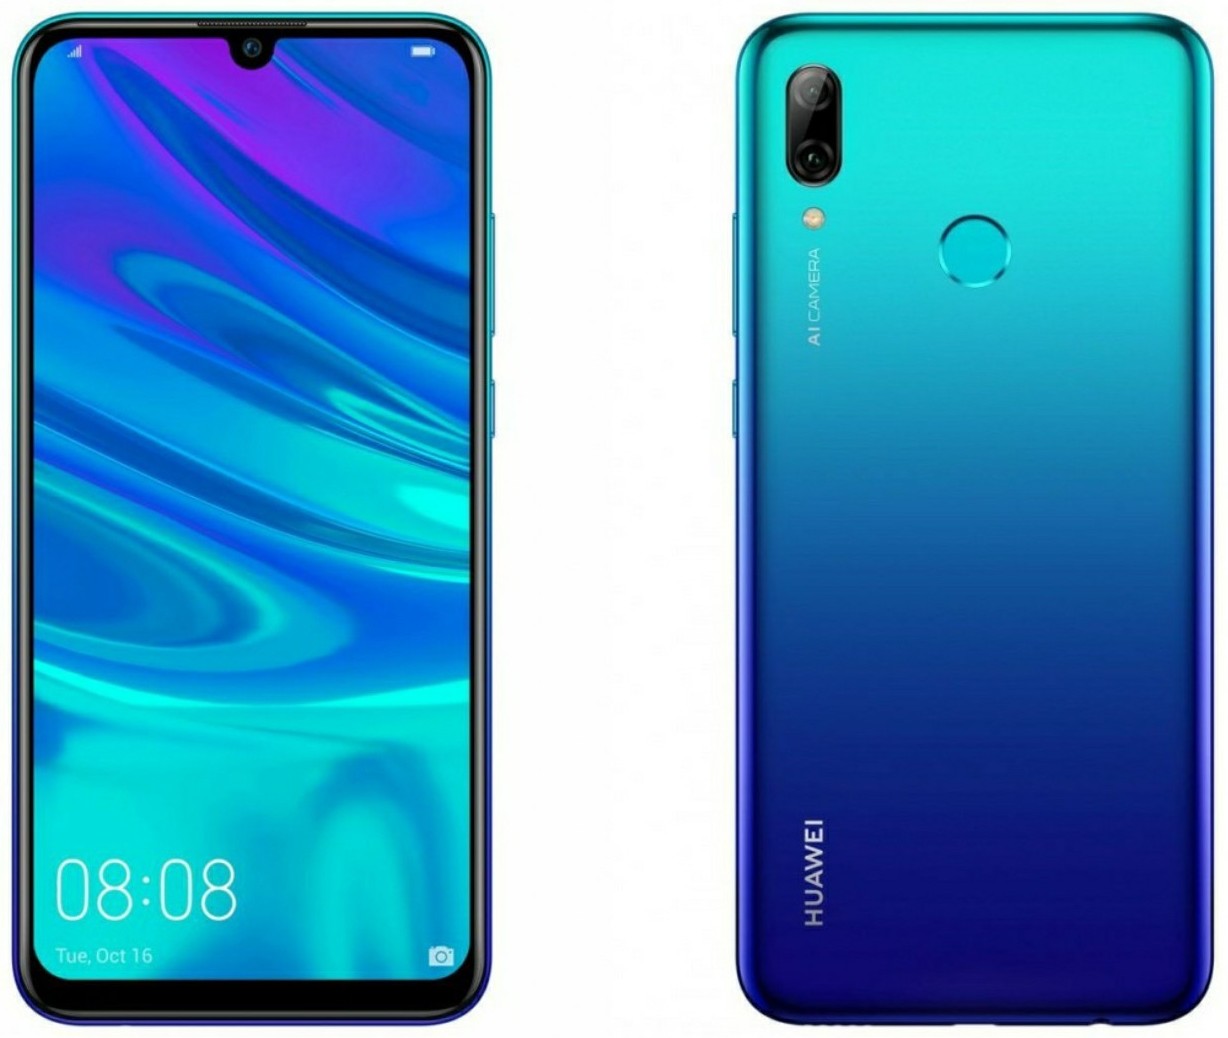 Huawei P Smart (2019) POT-LX3 32GB - Specs and Price - Phonegg